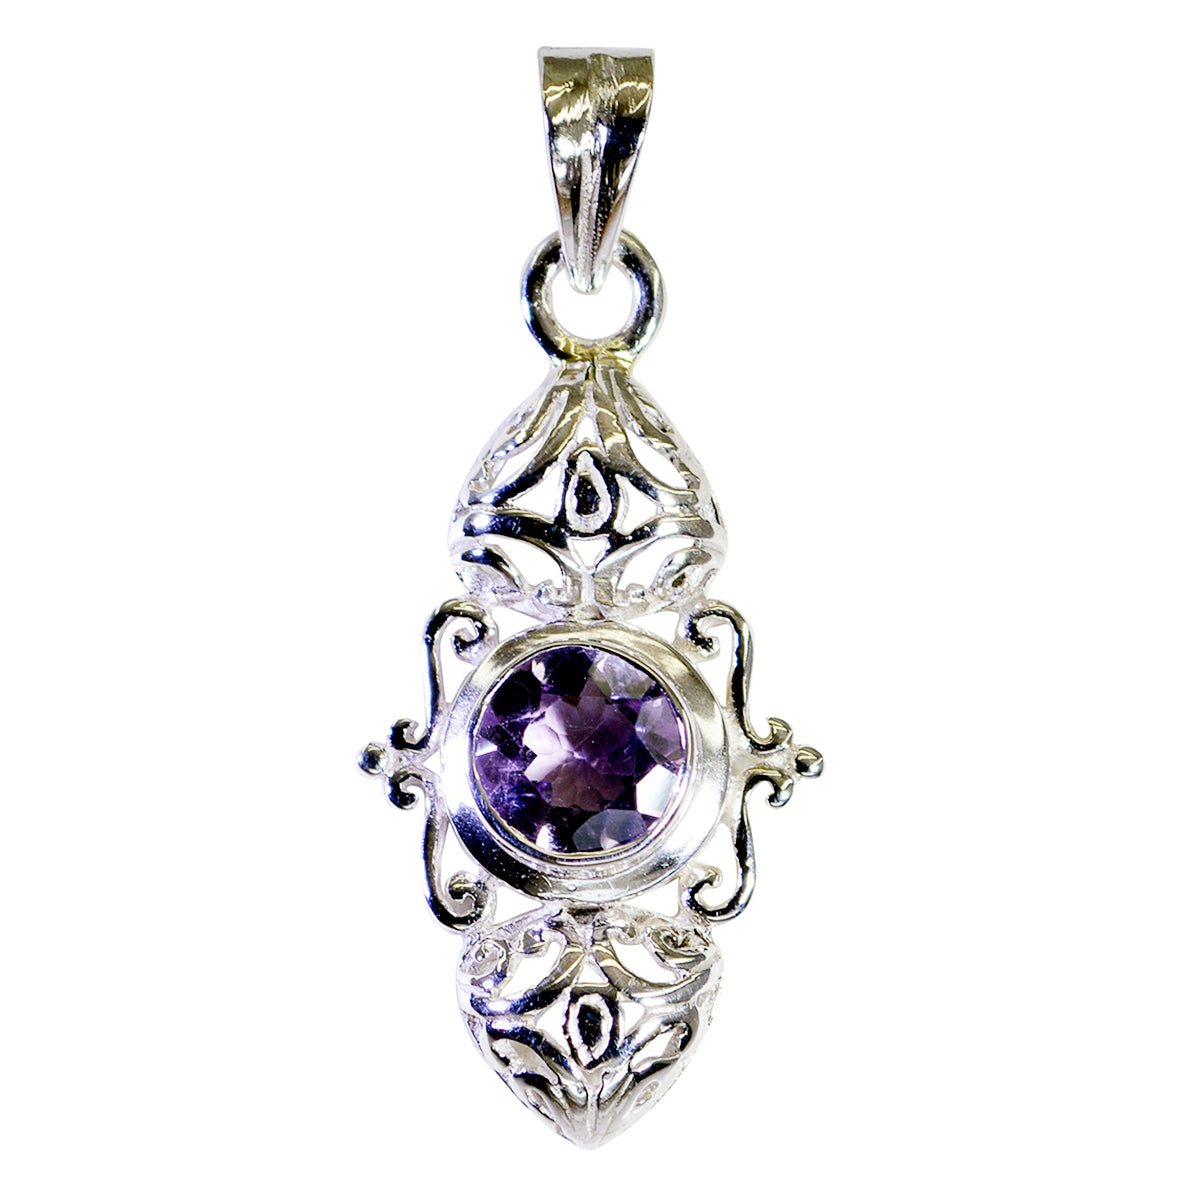 Riyo Good Gemstones Round Faceted Purple Amethyst Sterling Silver Pendant gift for easter Sunday